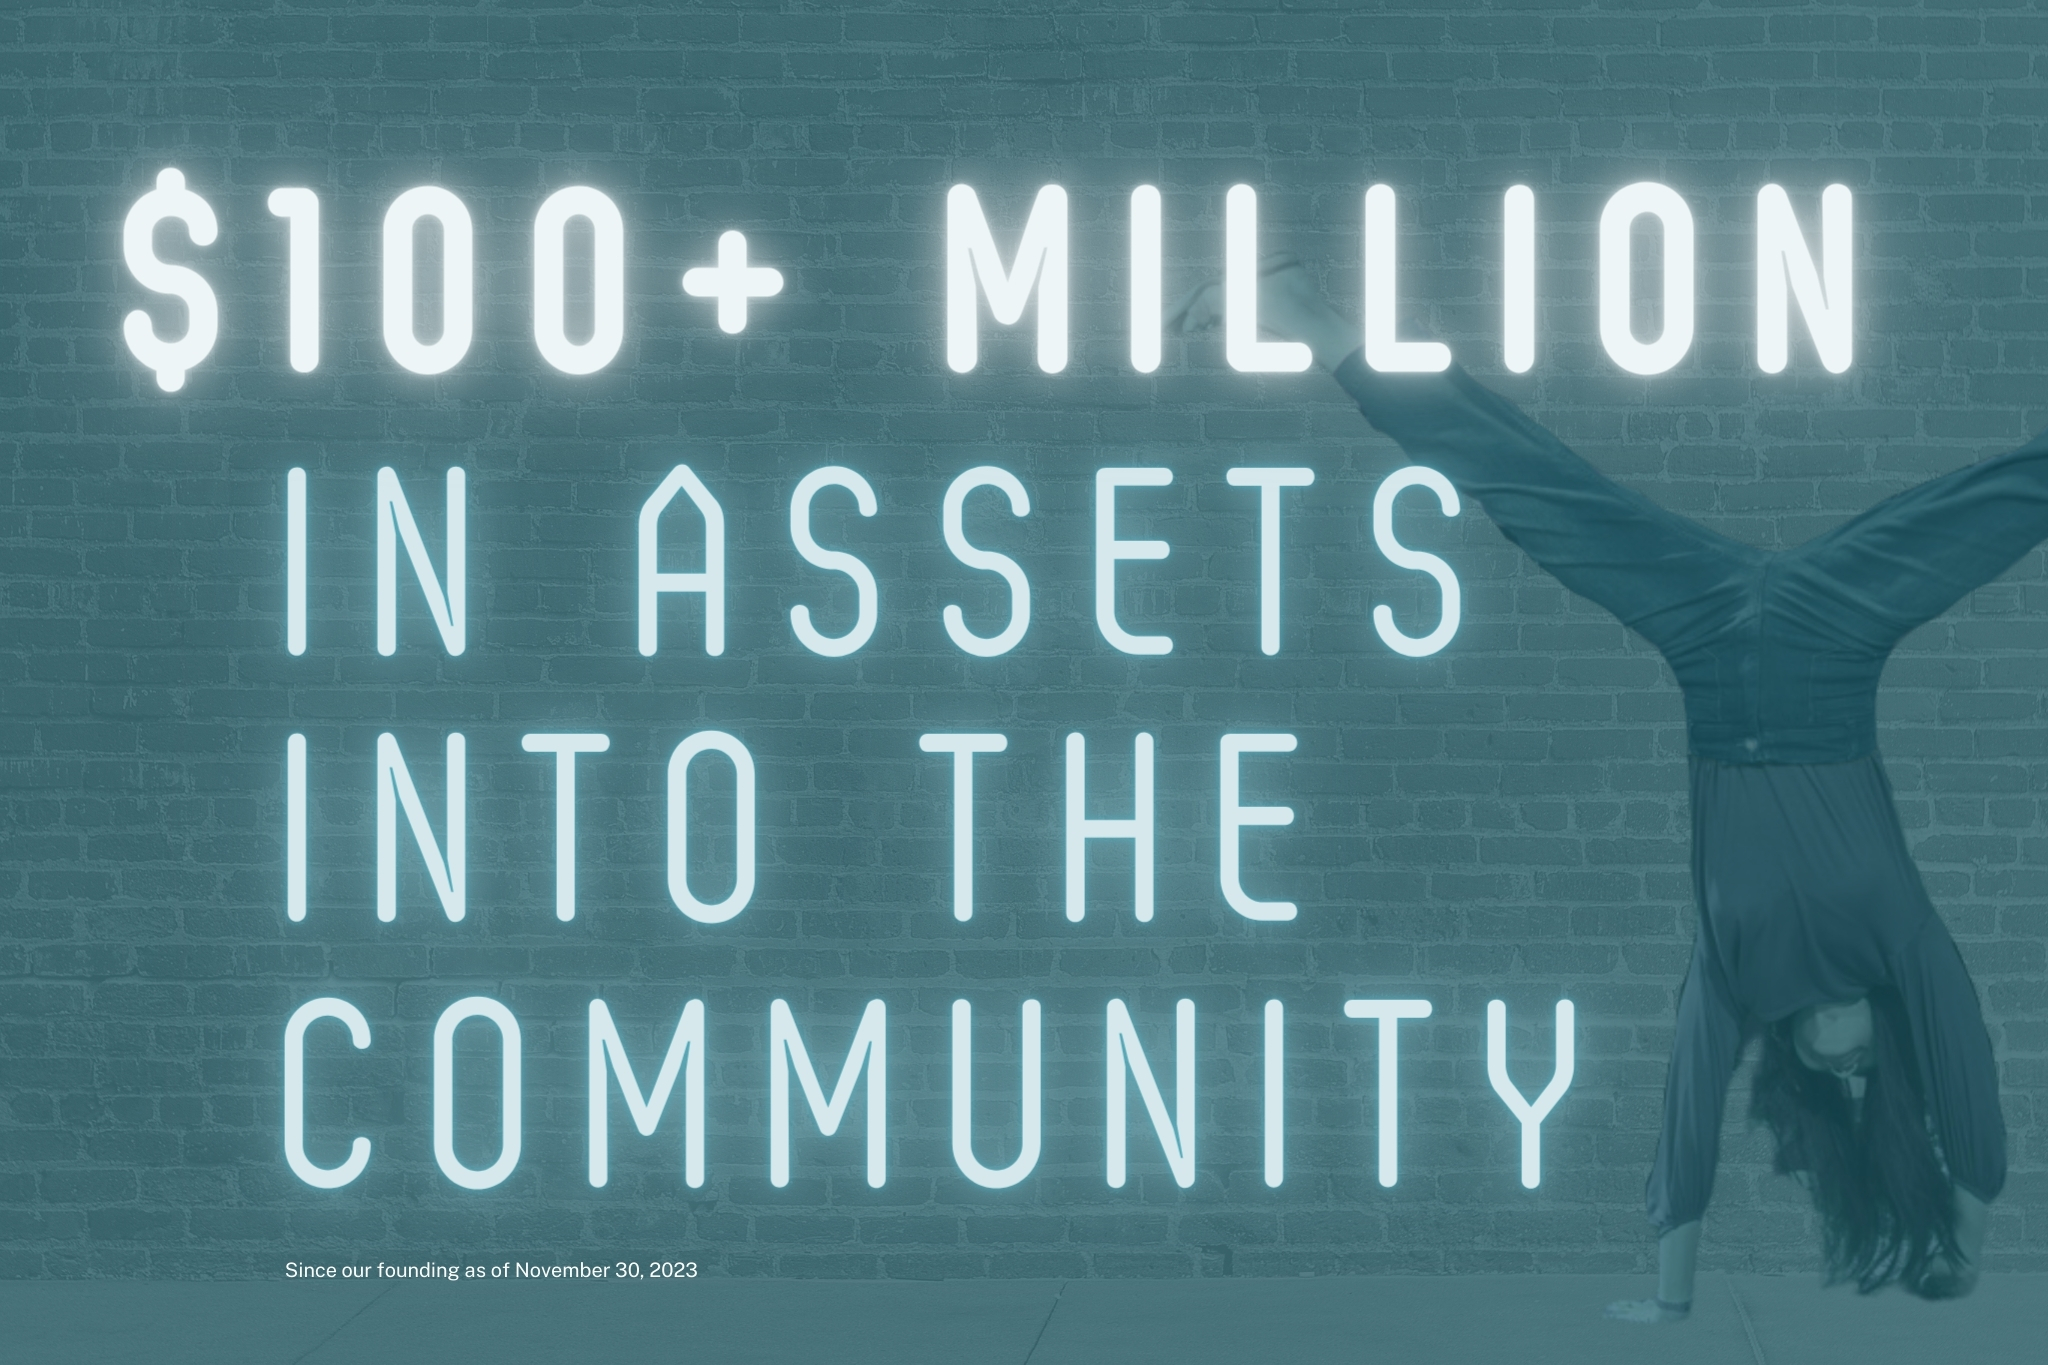 $100+ million in assets into the community